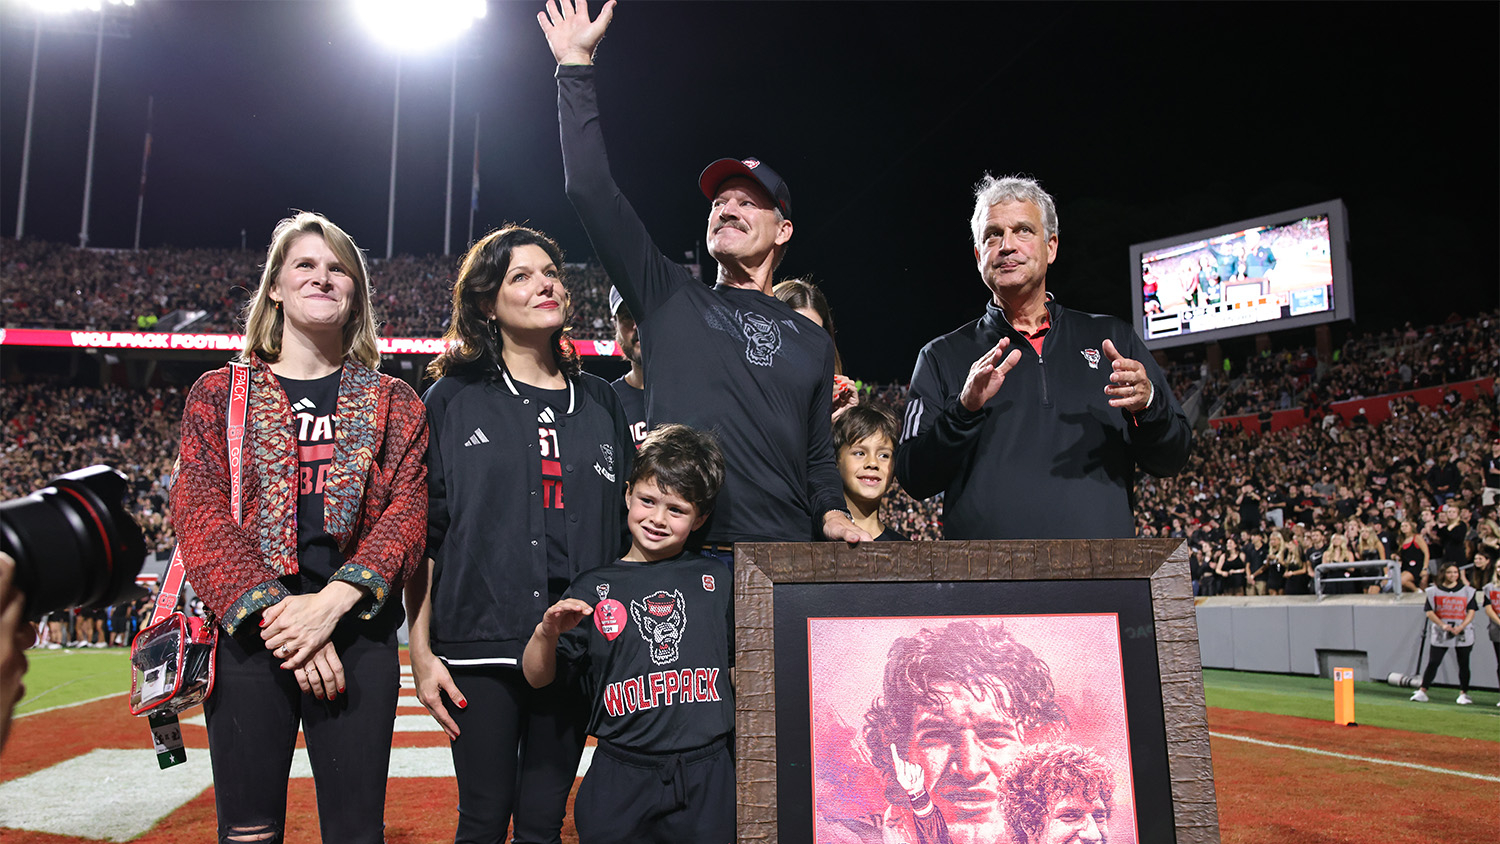 Bill Cowher on the field of Carter-Finley Stadium waves at the crowd along with his family and Athletics Director Boo Corrigan